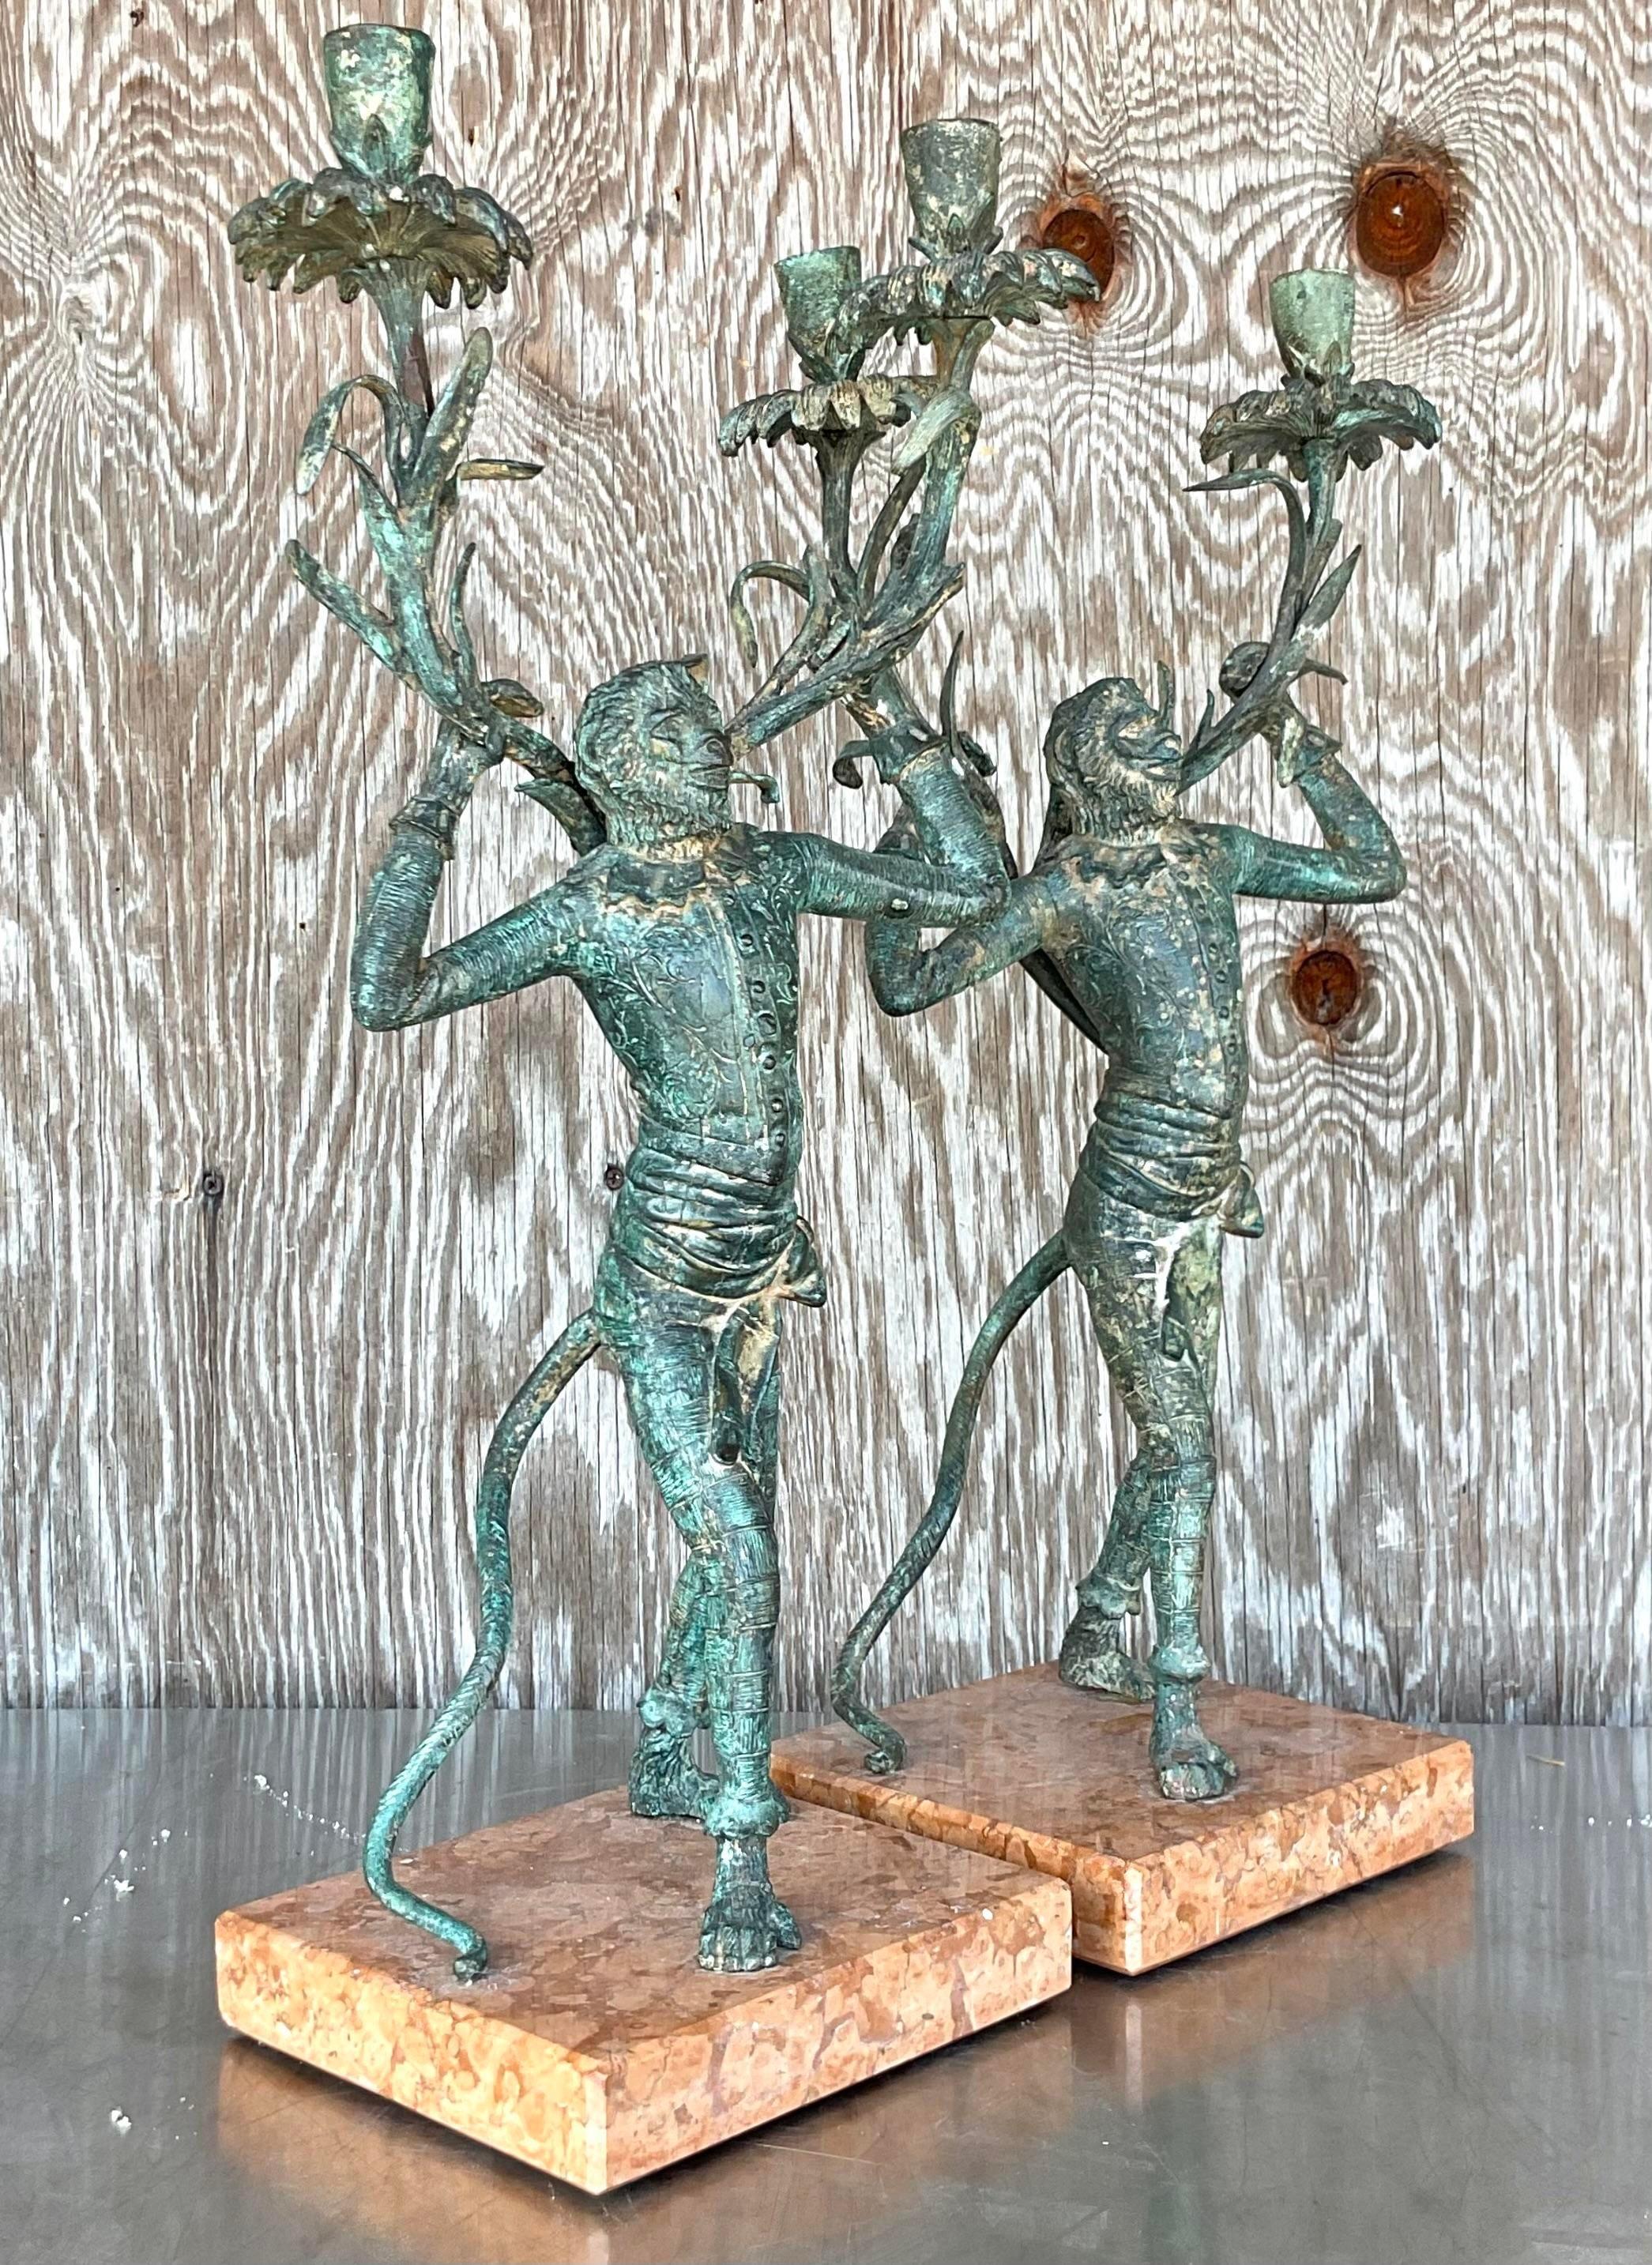 A spectacular pair of monumental vintage Regency candelabras. A handsome pair of bronze monkeys with incredible patina from time. Rest on gorgeous marble plinths. Acquired from a Palm Beach estate.